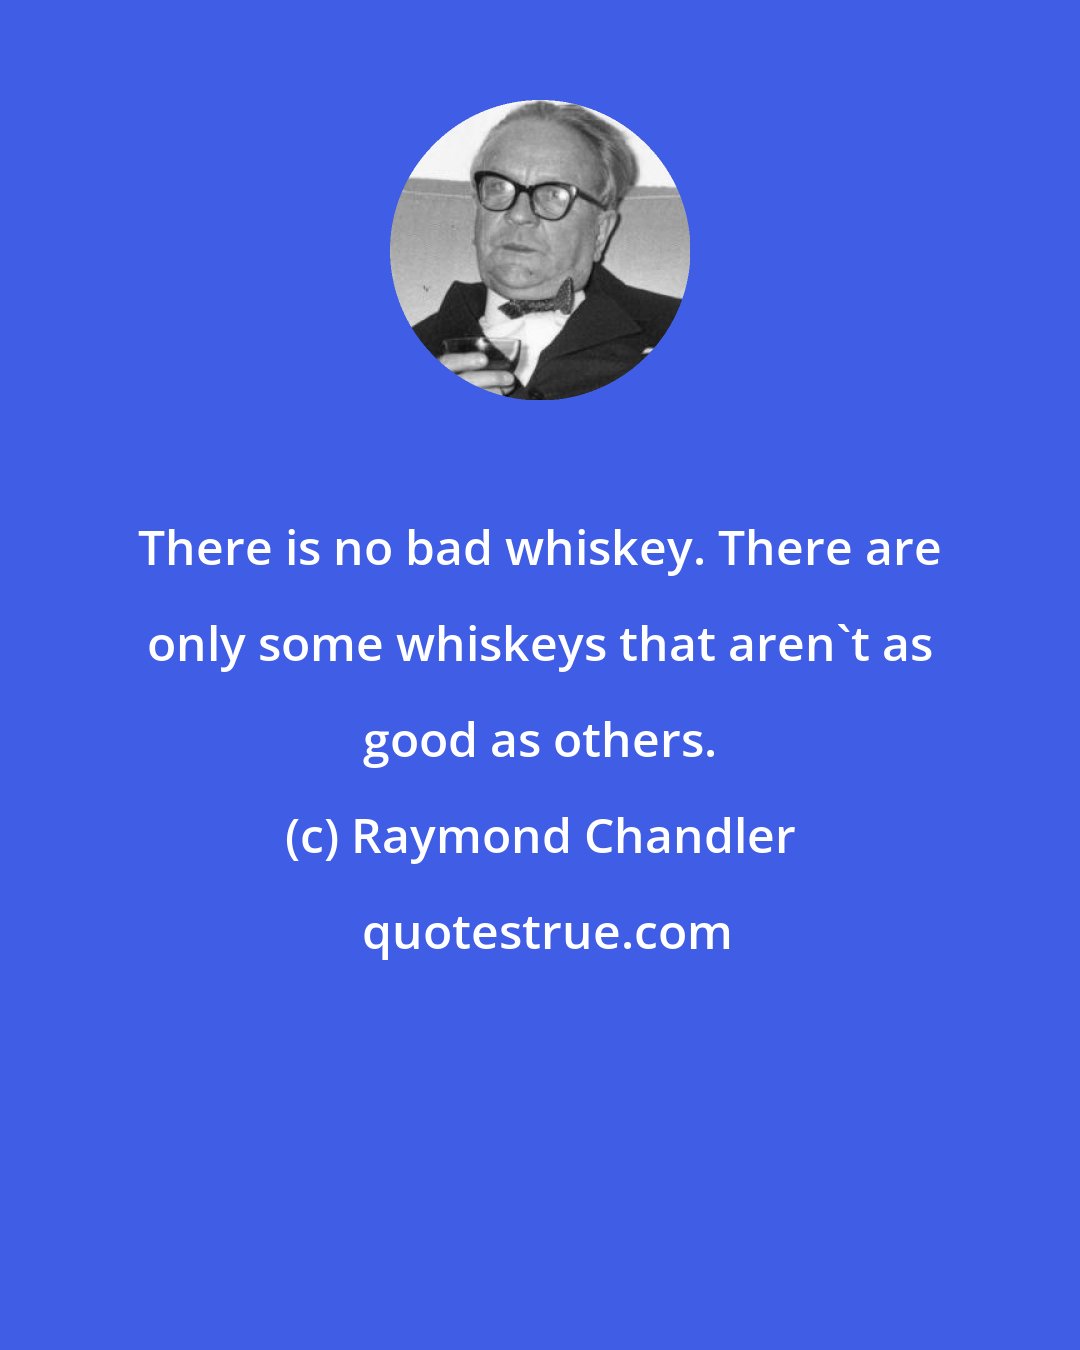 Raymond Chandler: There is no bad whiskey. There are only some whiskeys that aren't as good as others.